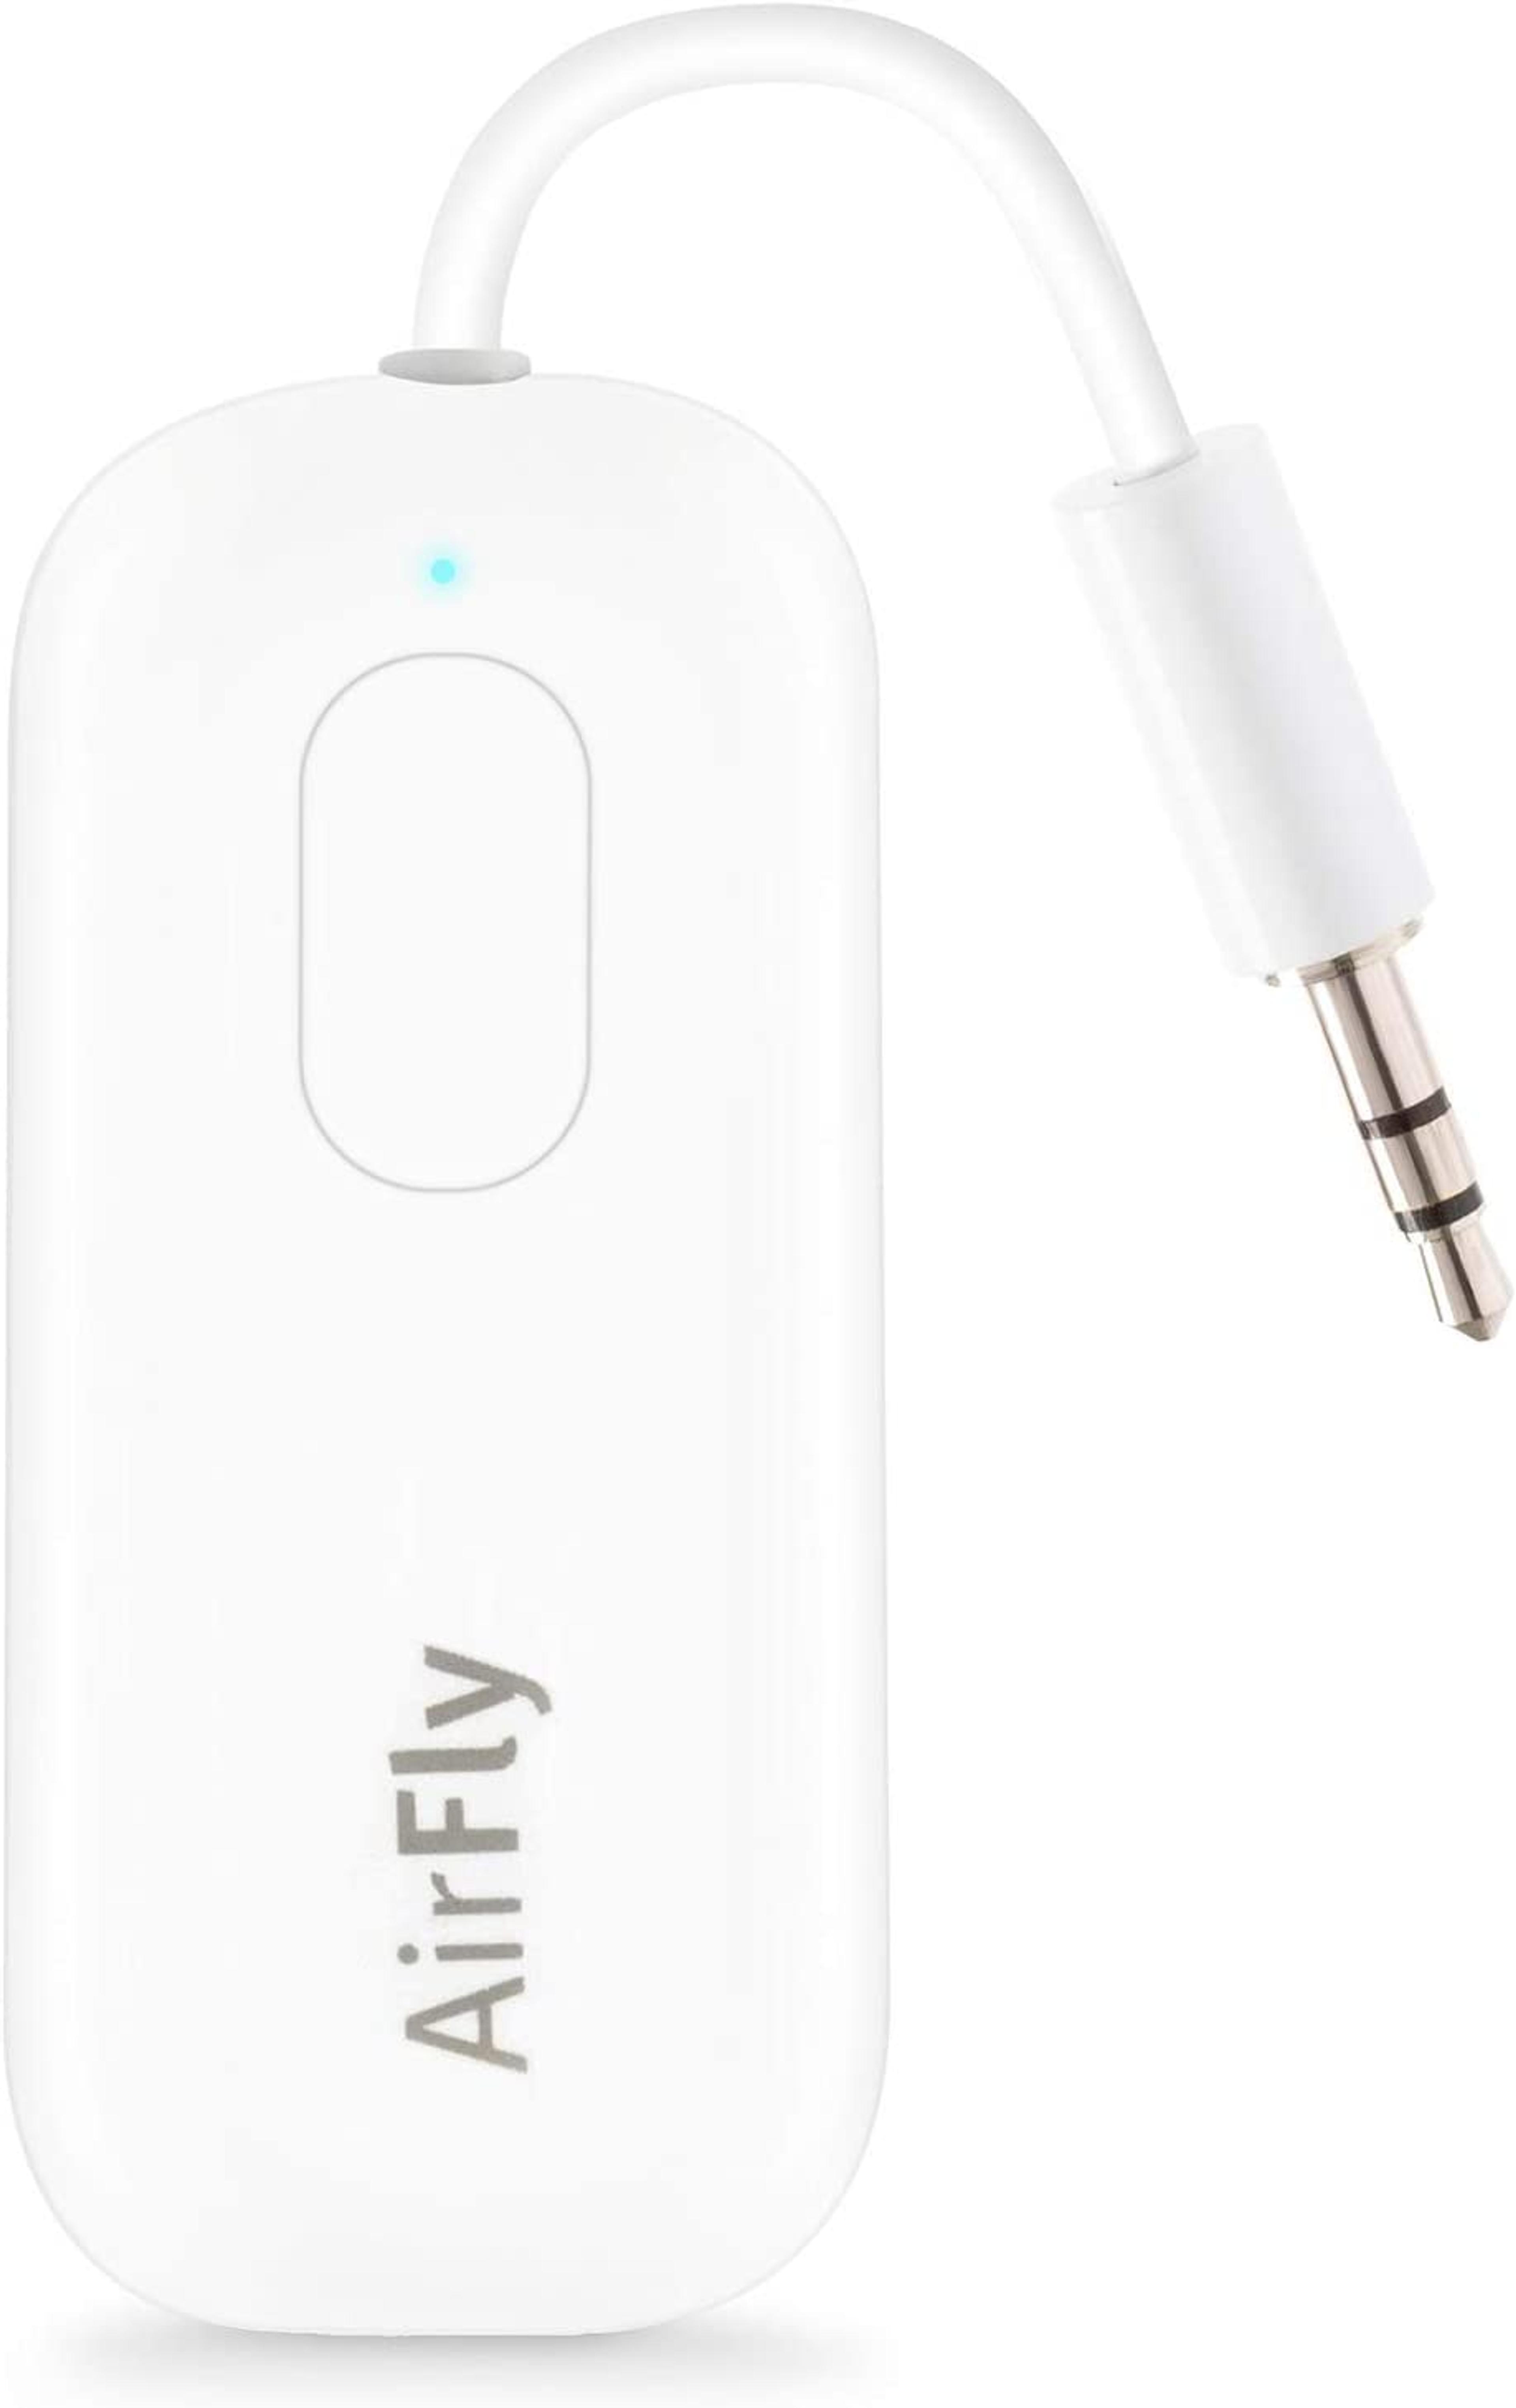 Twelve South AirFly Pro | Wireless Transmitter/Receiver with Audio Sharing for up to 2 AirPods/Wireless Headphones to Any Audio Jack for use on Airplanes, Boats or in Gym, Home, auto